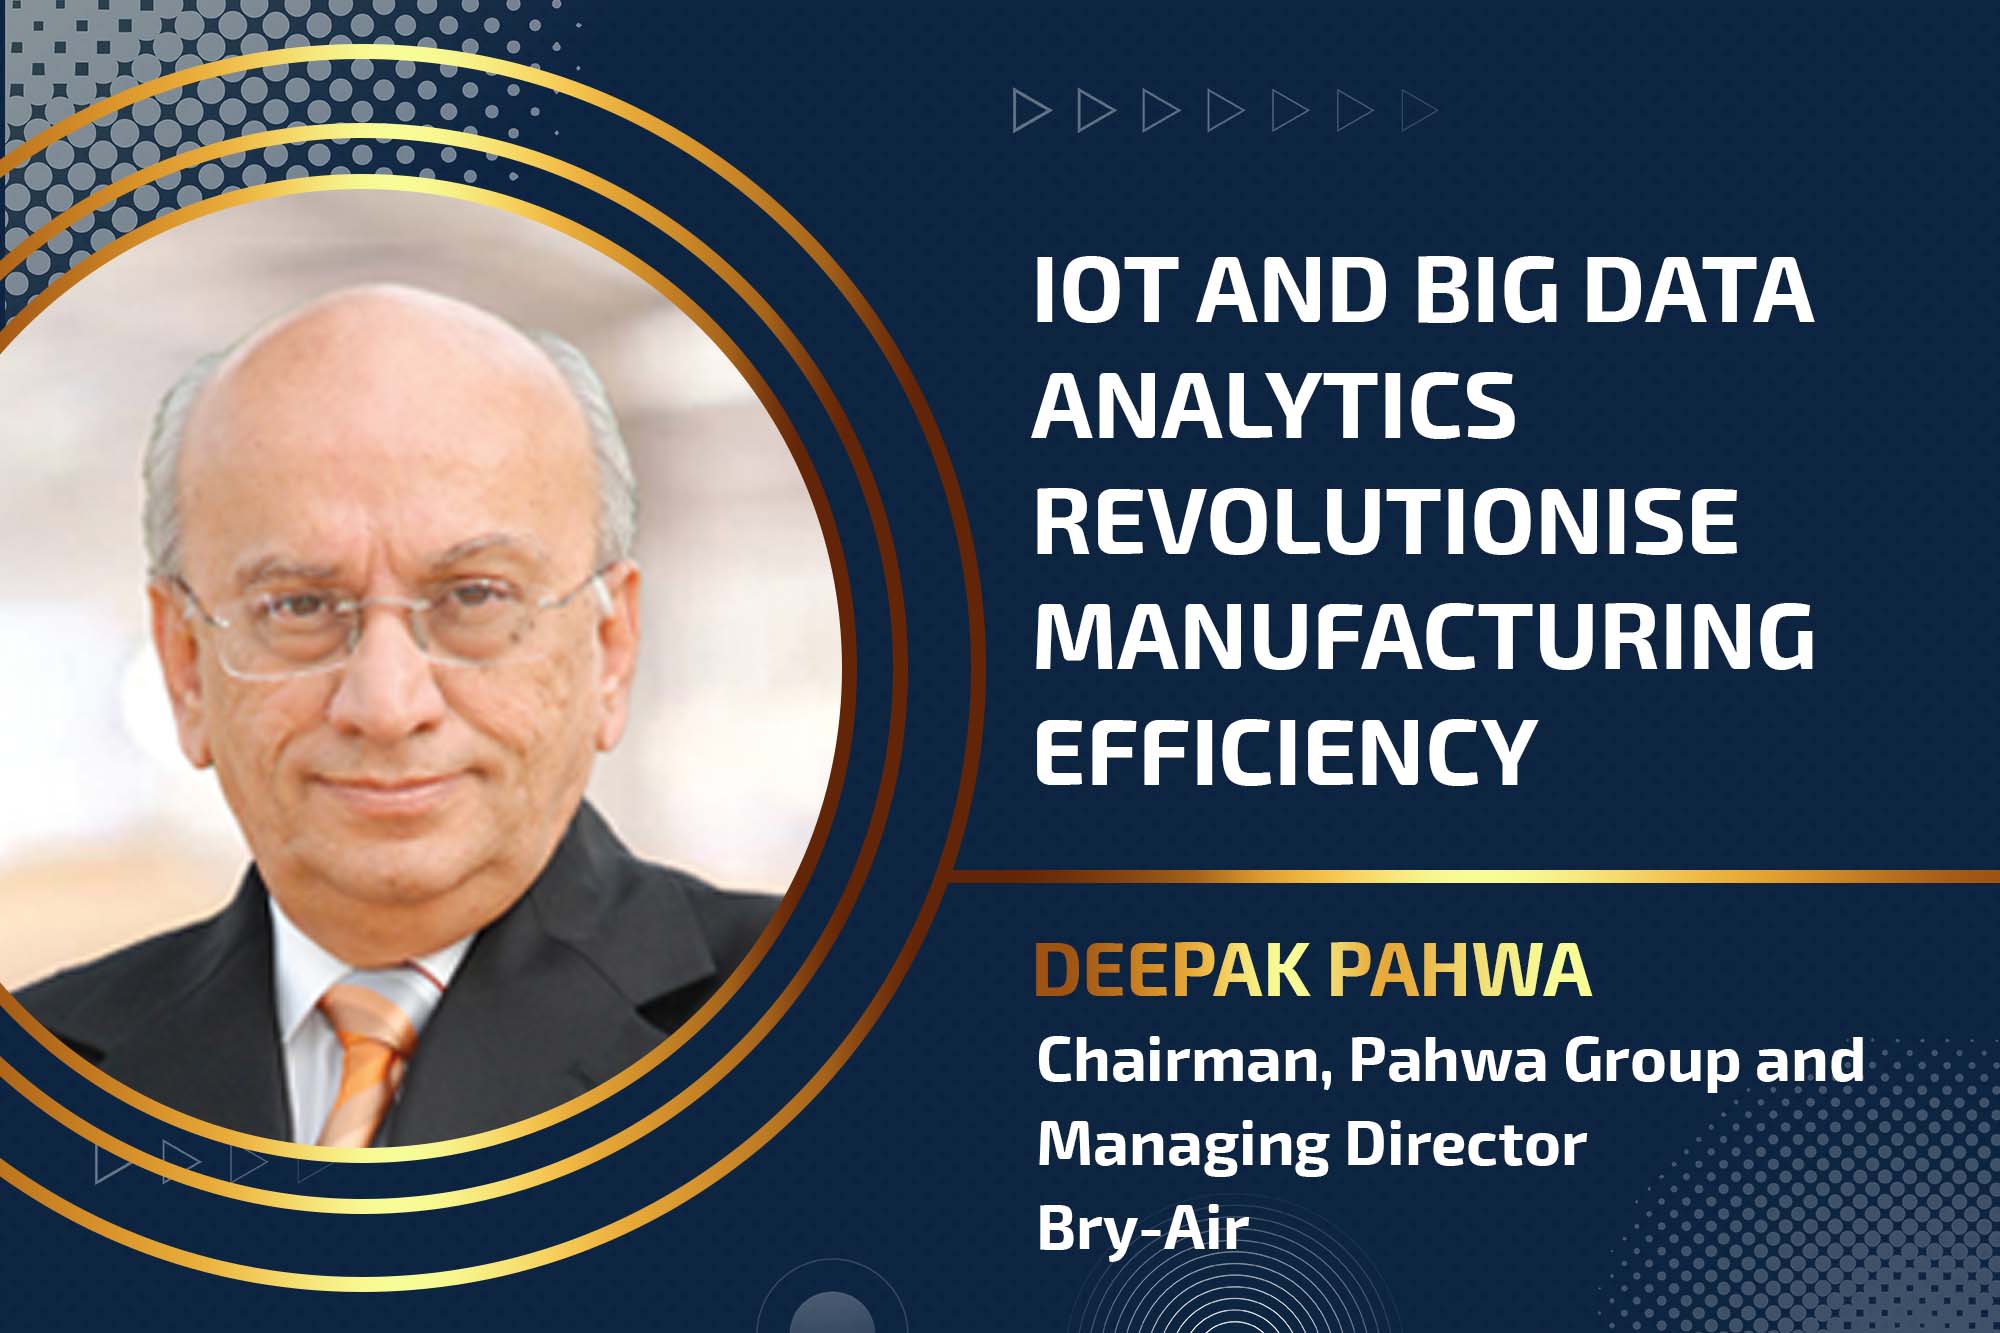 IoT and big data analytics revolutionise manufacturing efficiency 